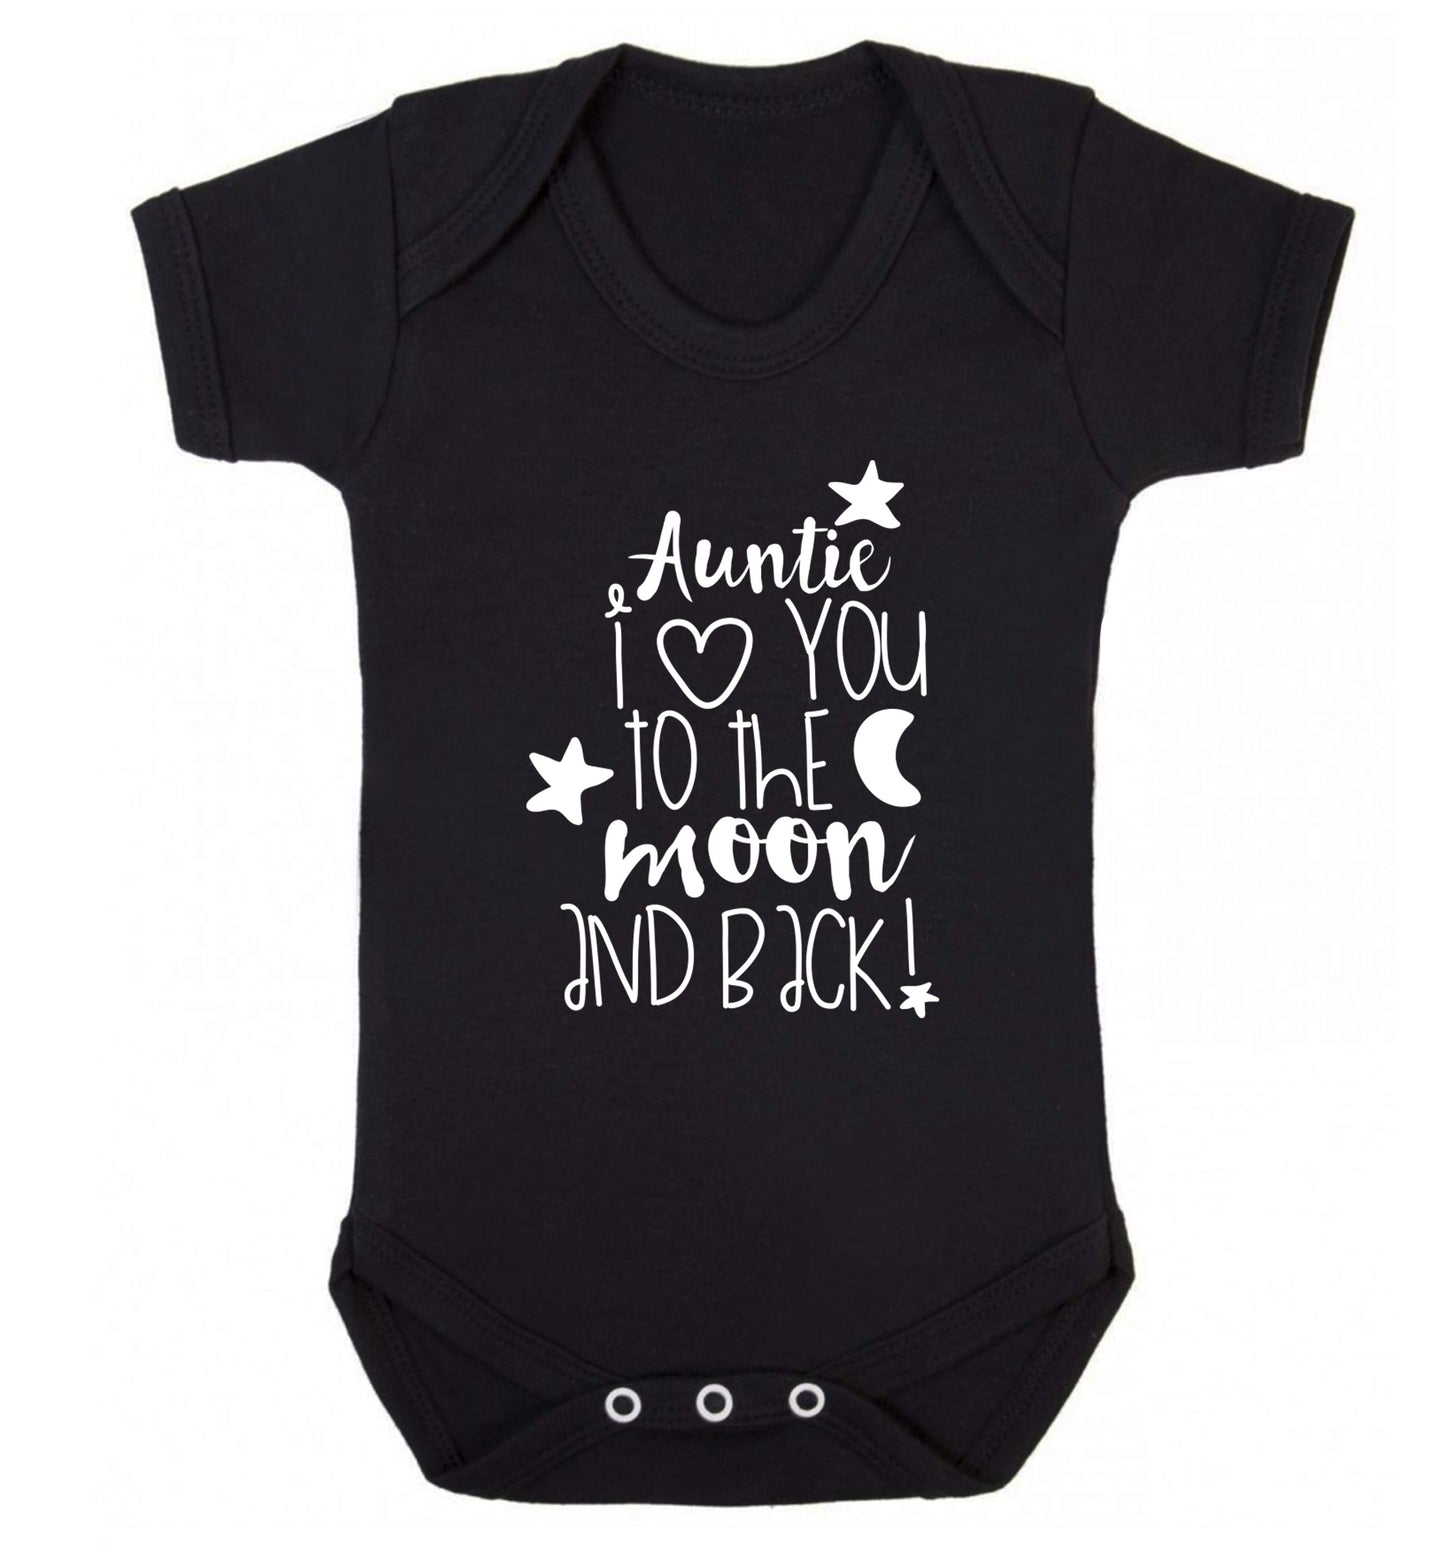 Auntie I love you to the moon and back Baby Vest black 18-24 months